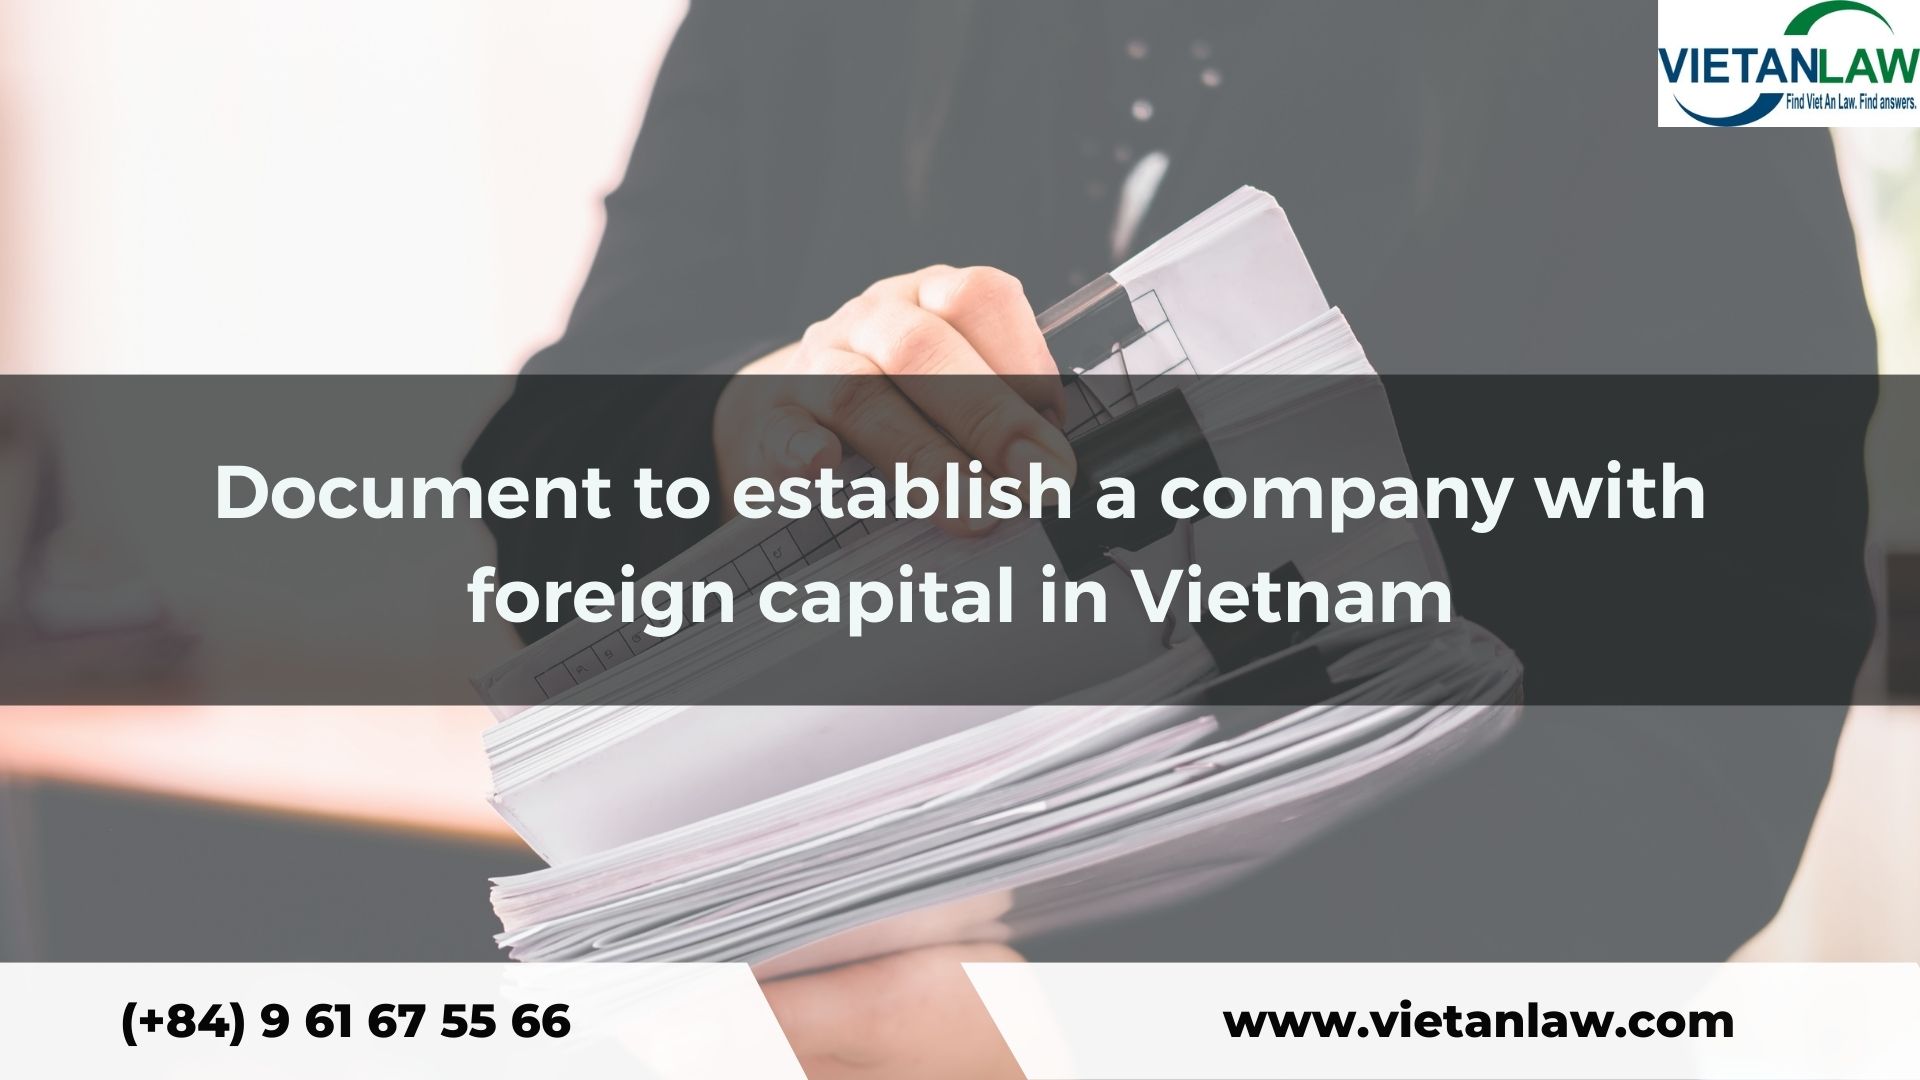 Document to establish a company with foreign capital in Vietnam